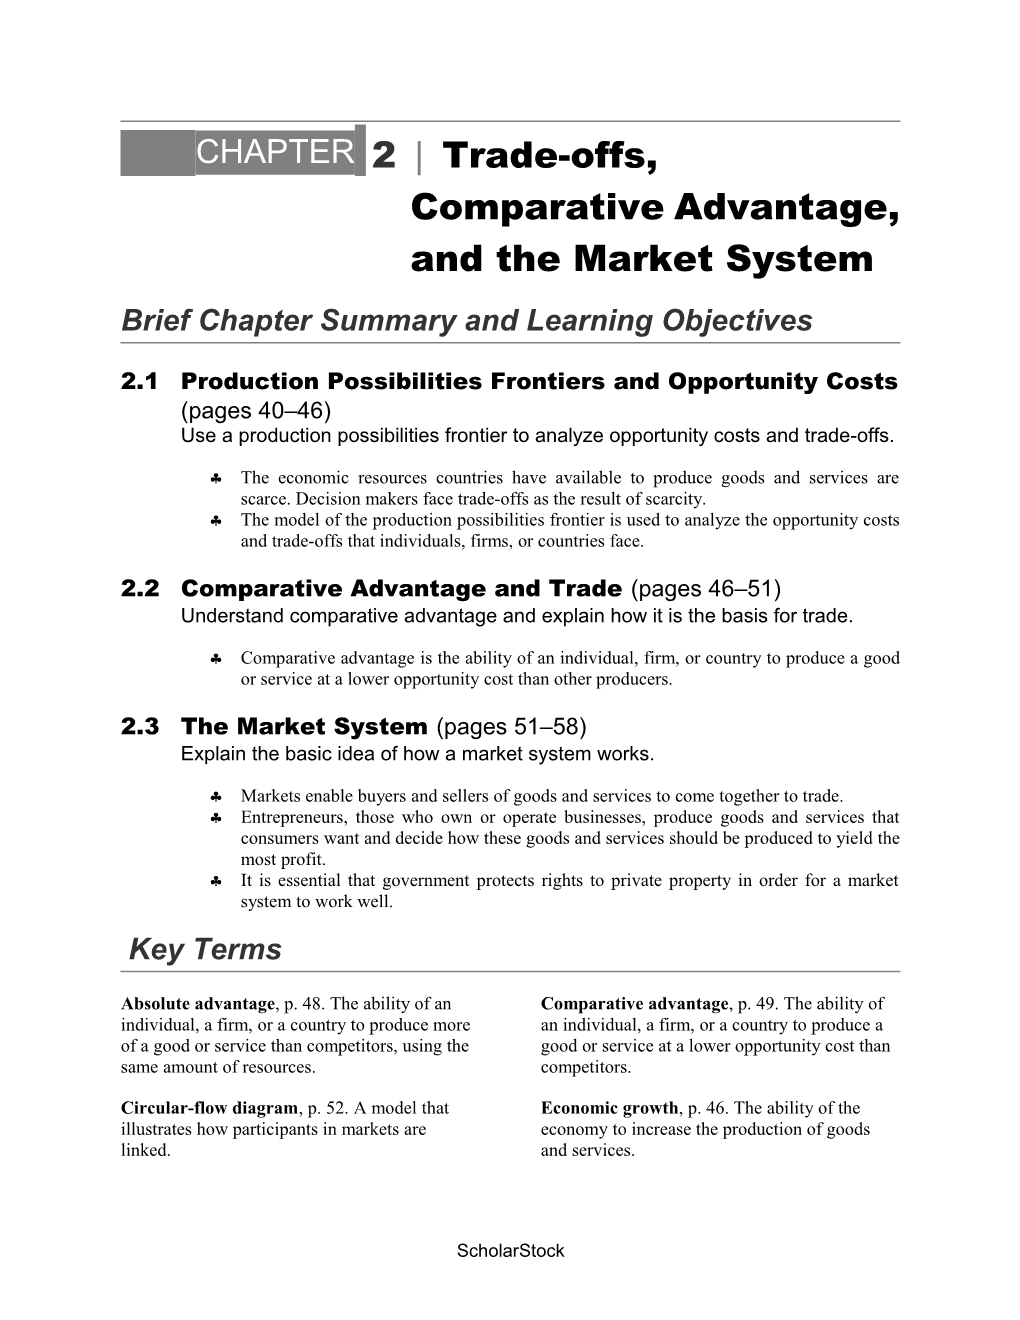 Brief Chapter Summary and Learning Objectives